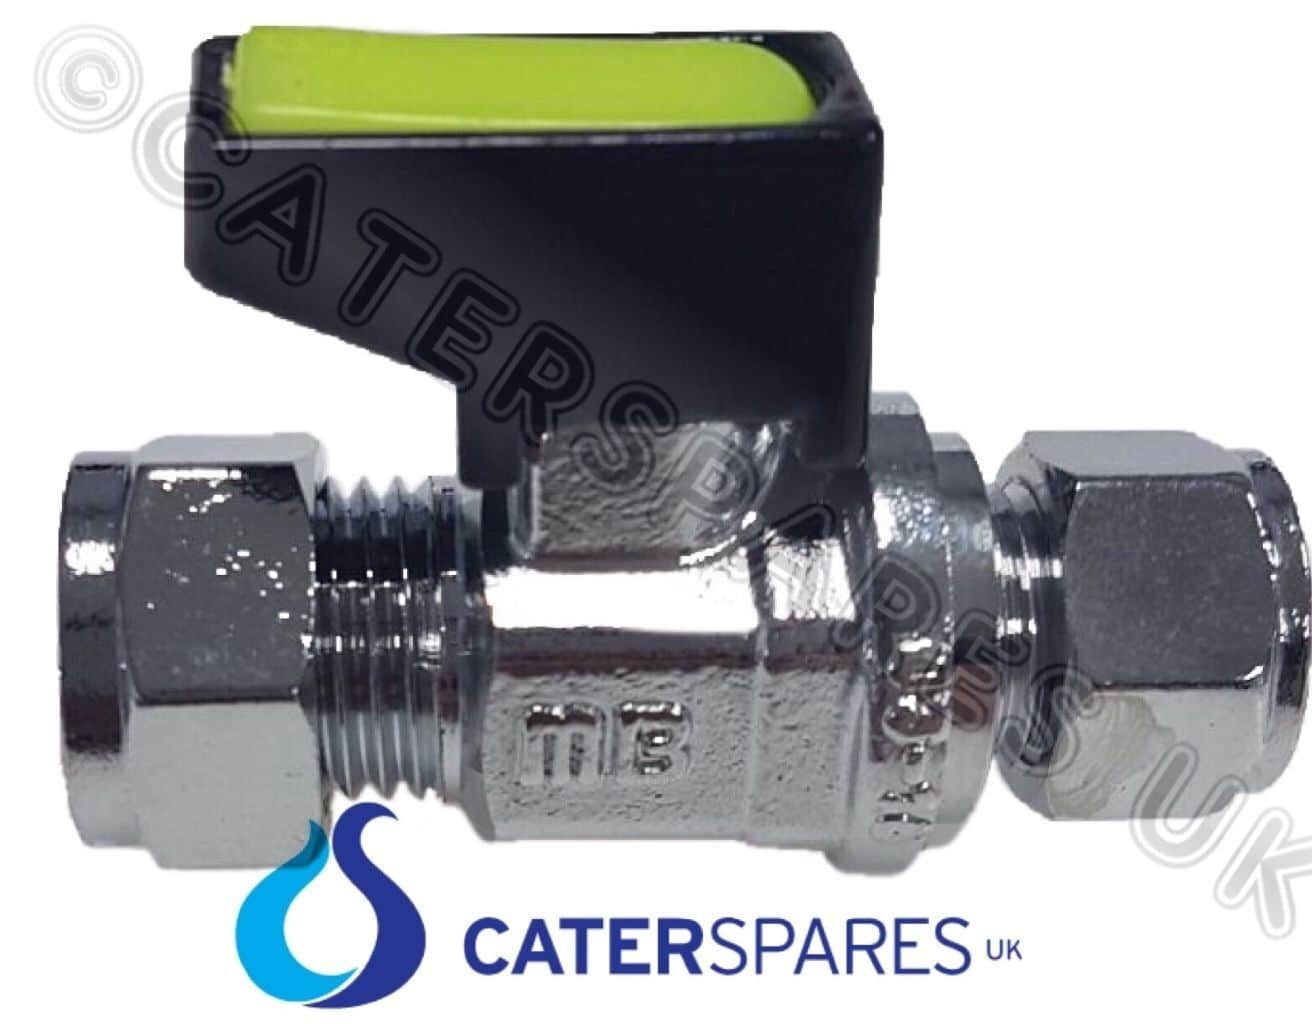 8mm GAS MINI LEVER BALL VALVE COCK TAP 8mm APPROVED ISOLATING VALVE 